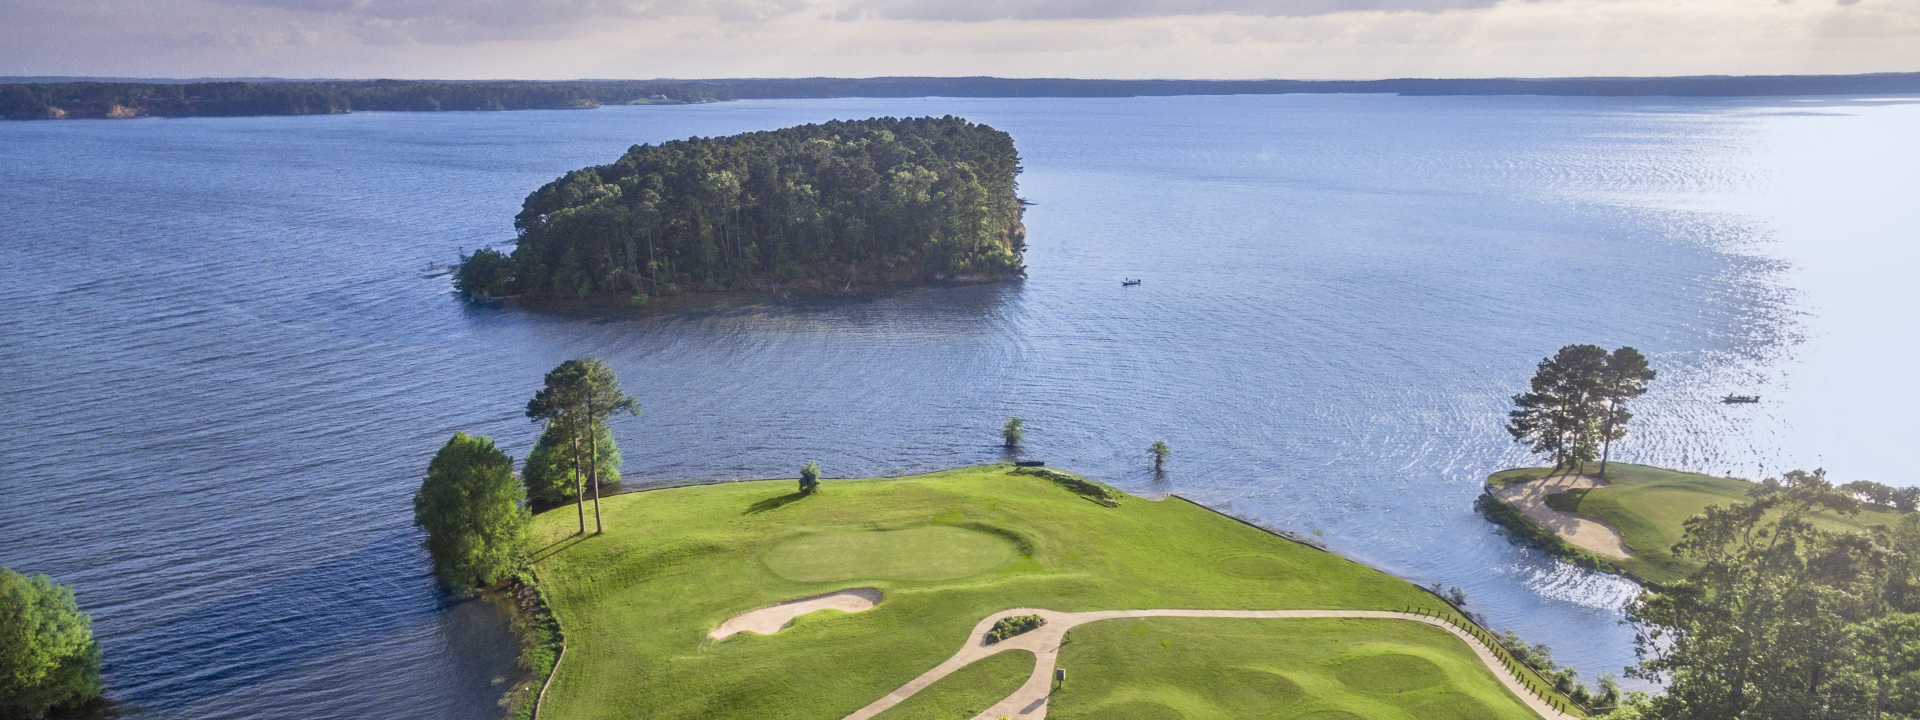 aerial view of golf and island